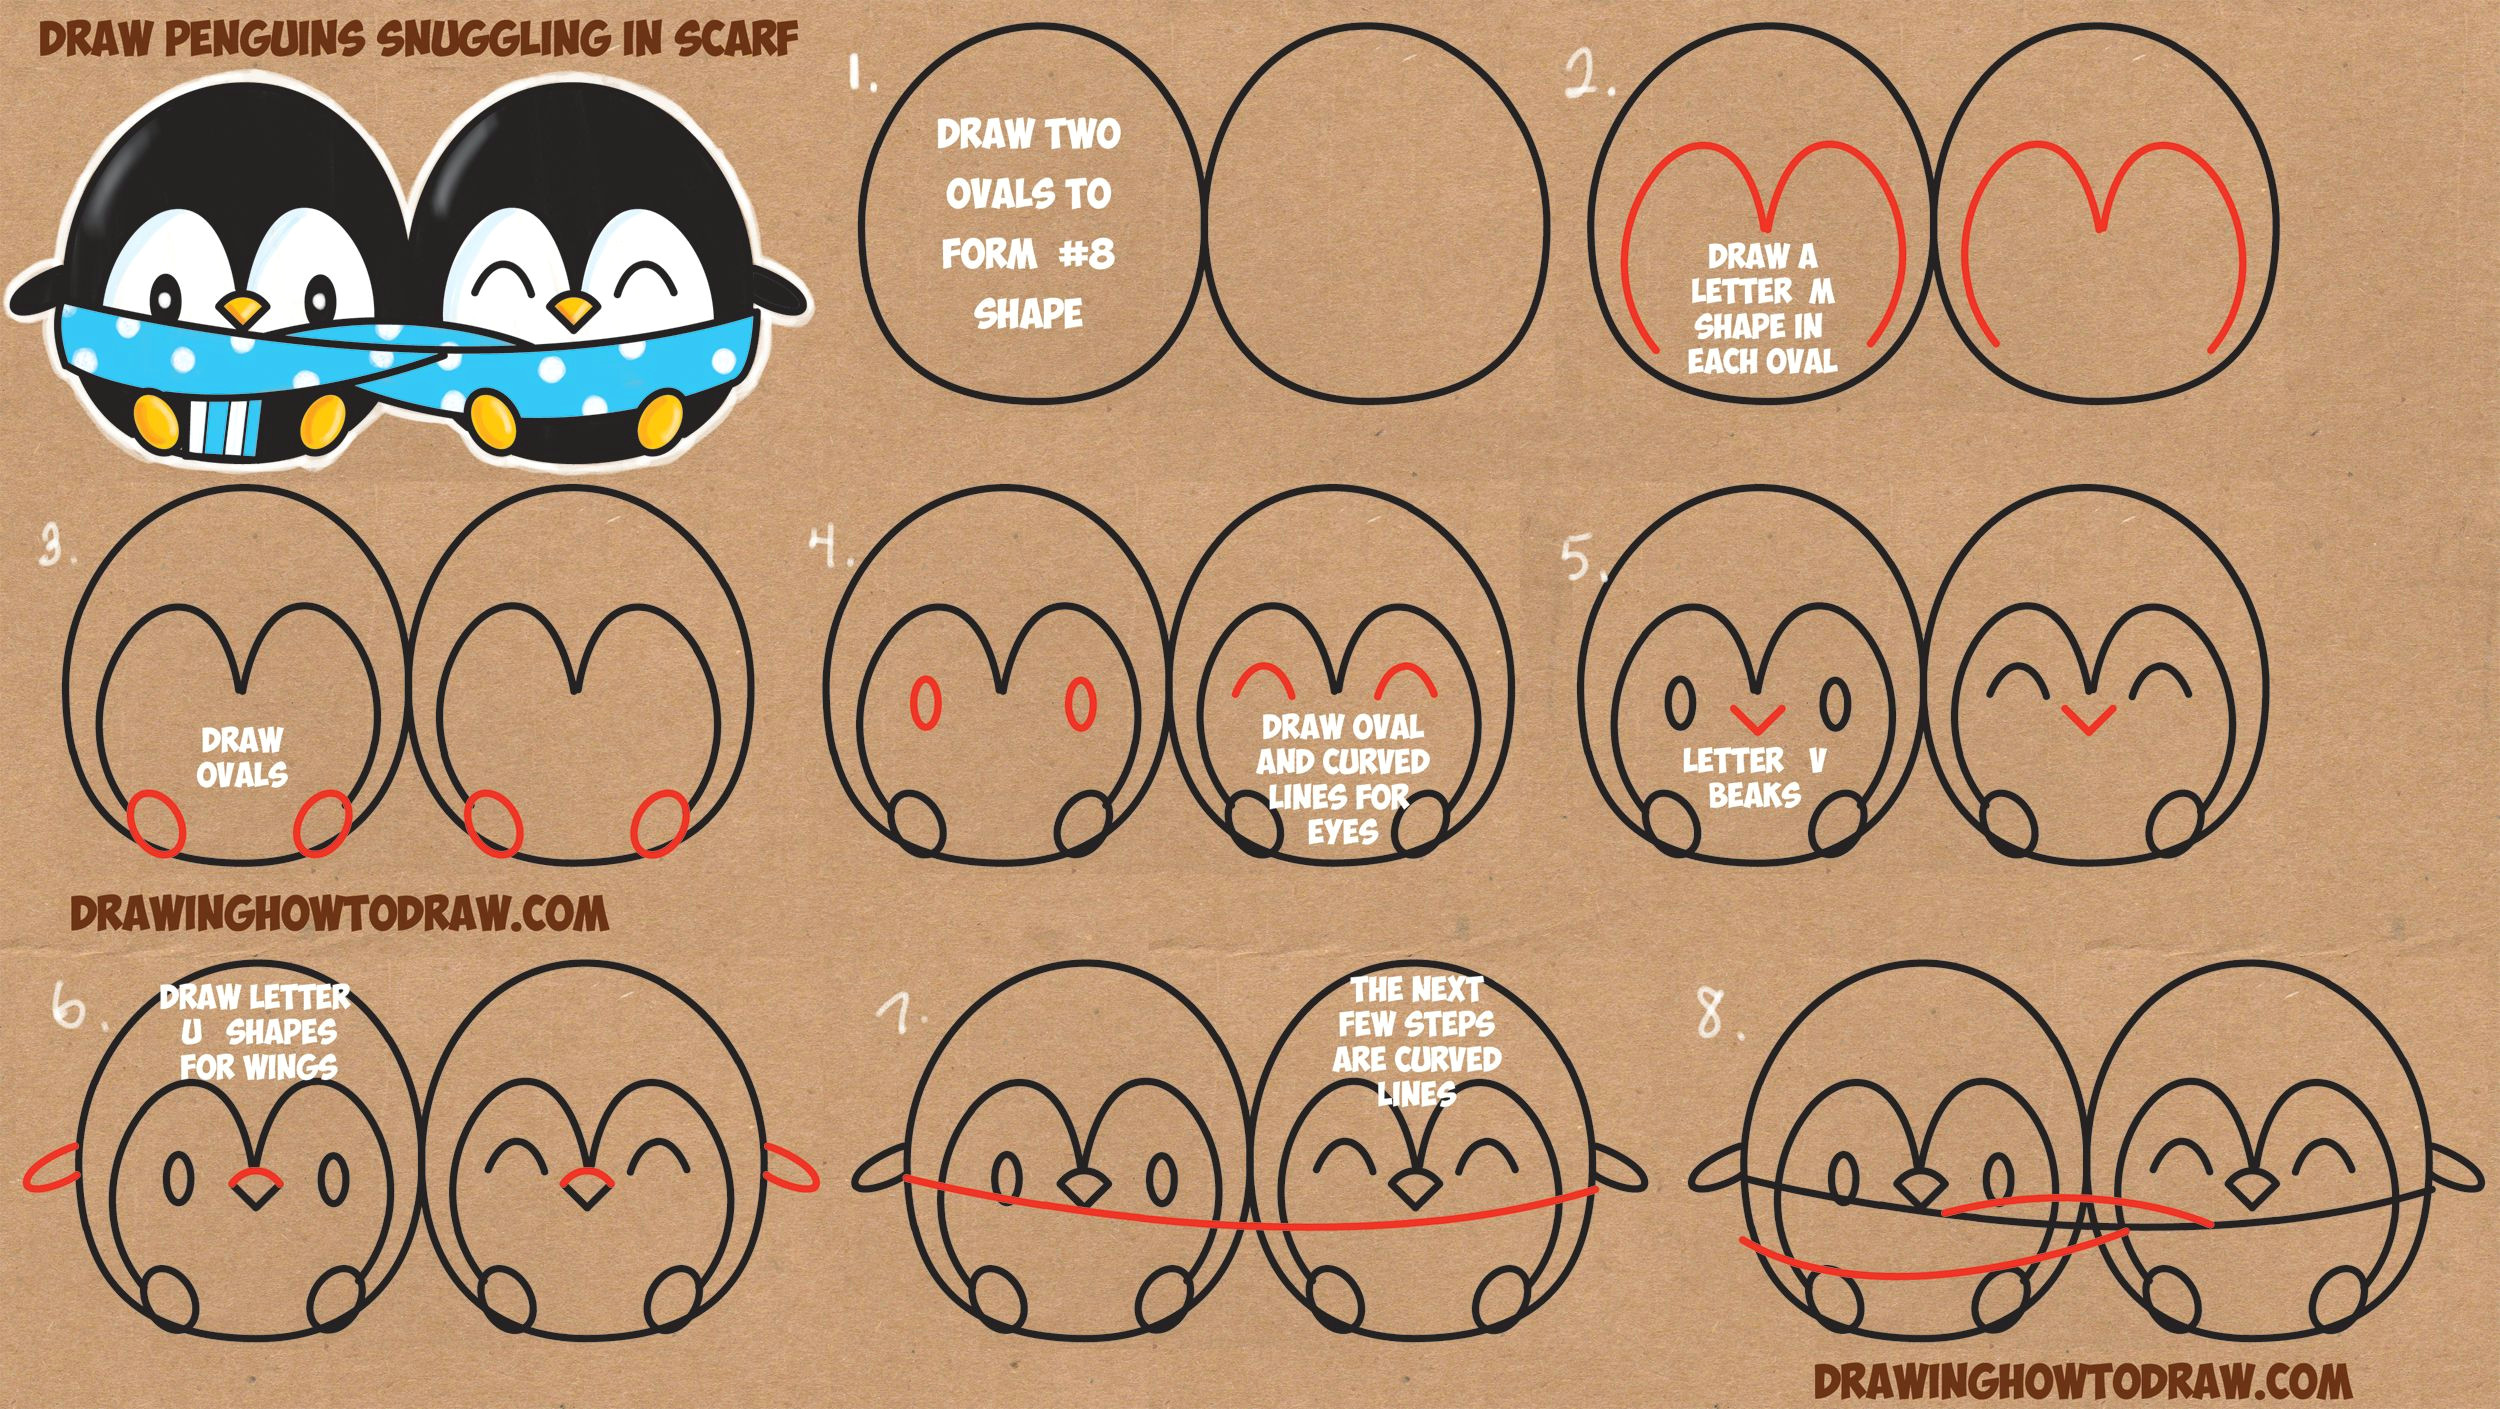 how to draw cute kawaii chibi cartoon penguins in a scarf for winter easy step by step drawing tutorial for kids